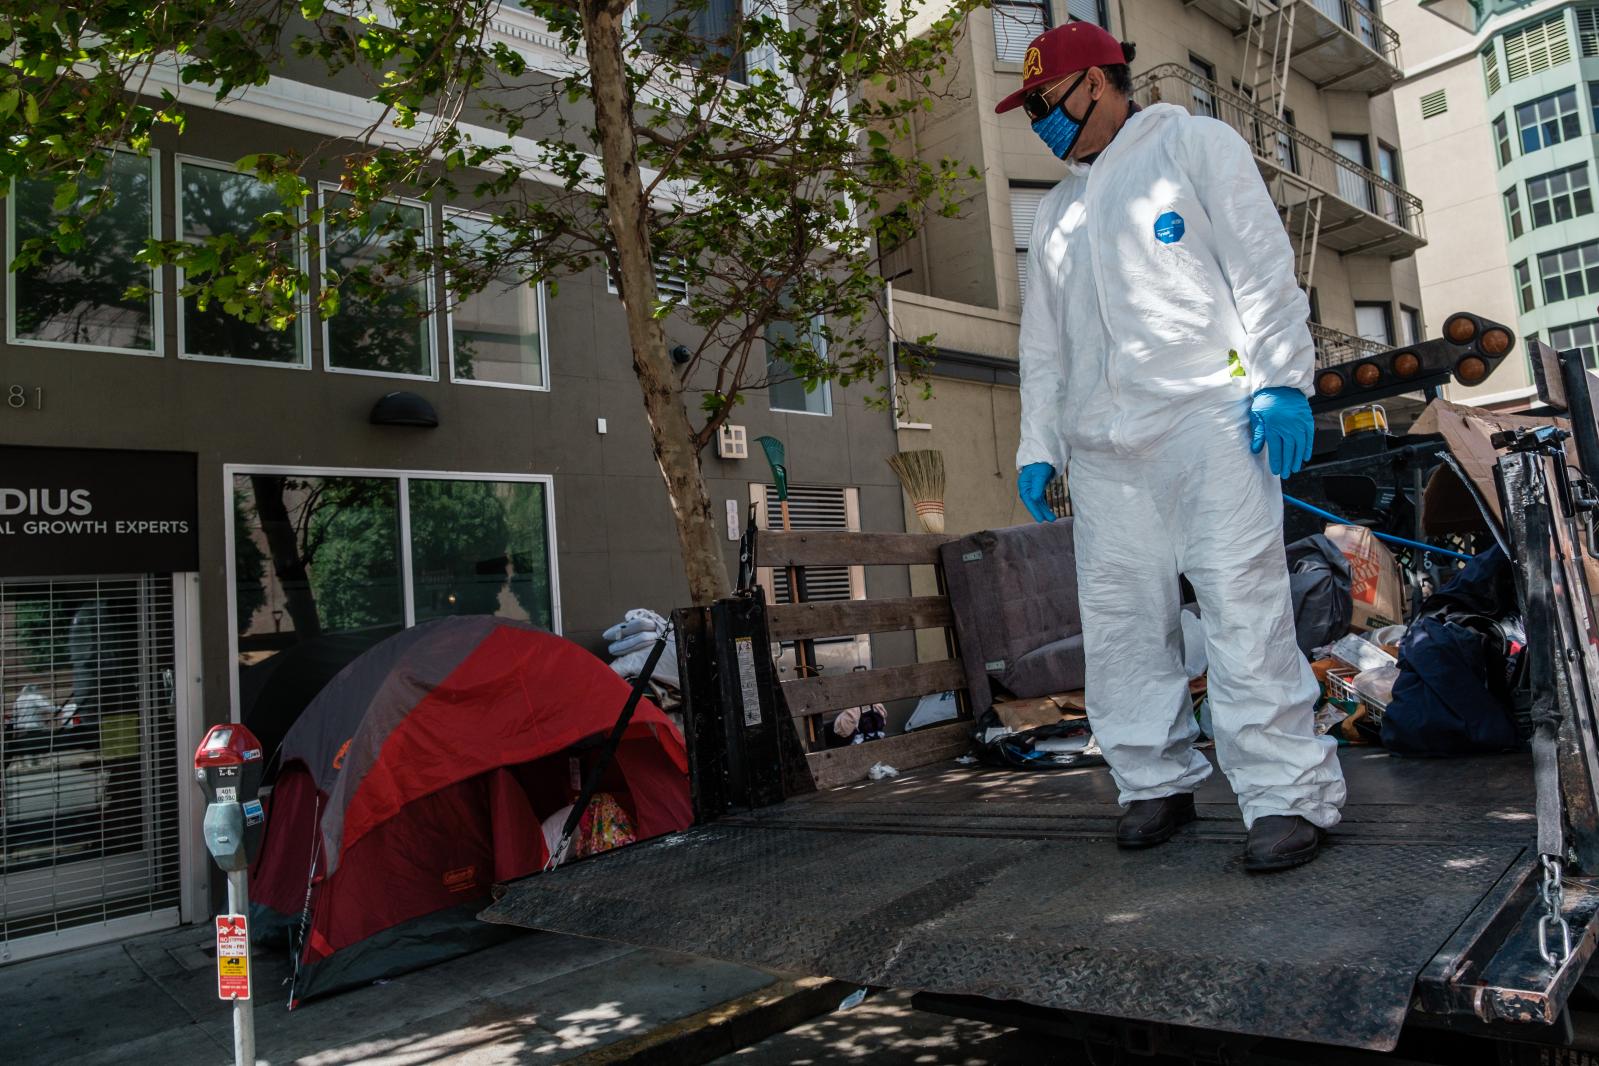 Image from San Francisco's Housing Crisis - City employee Abdul, helps people staying in a small tent...